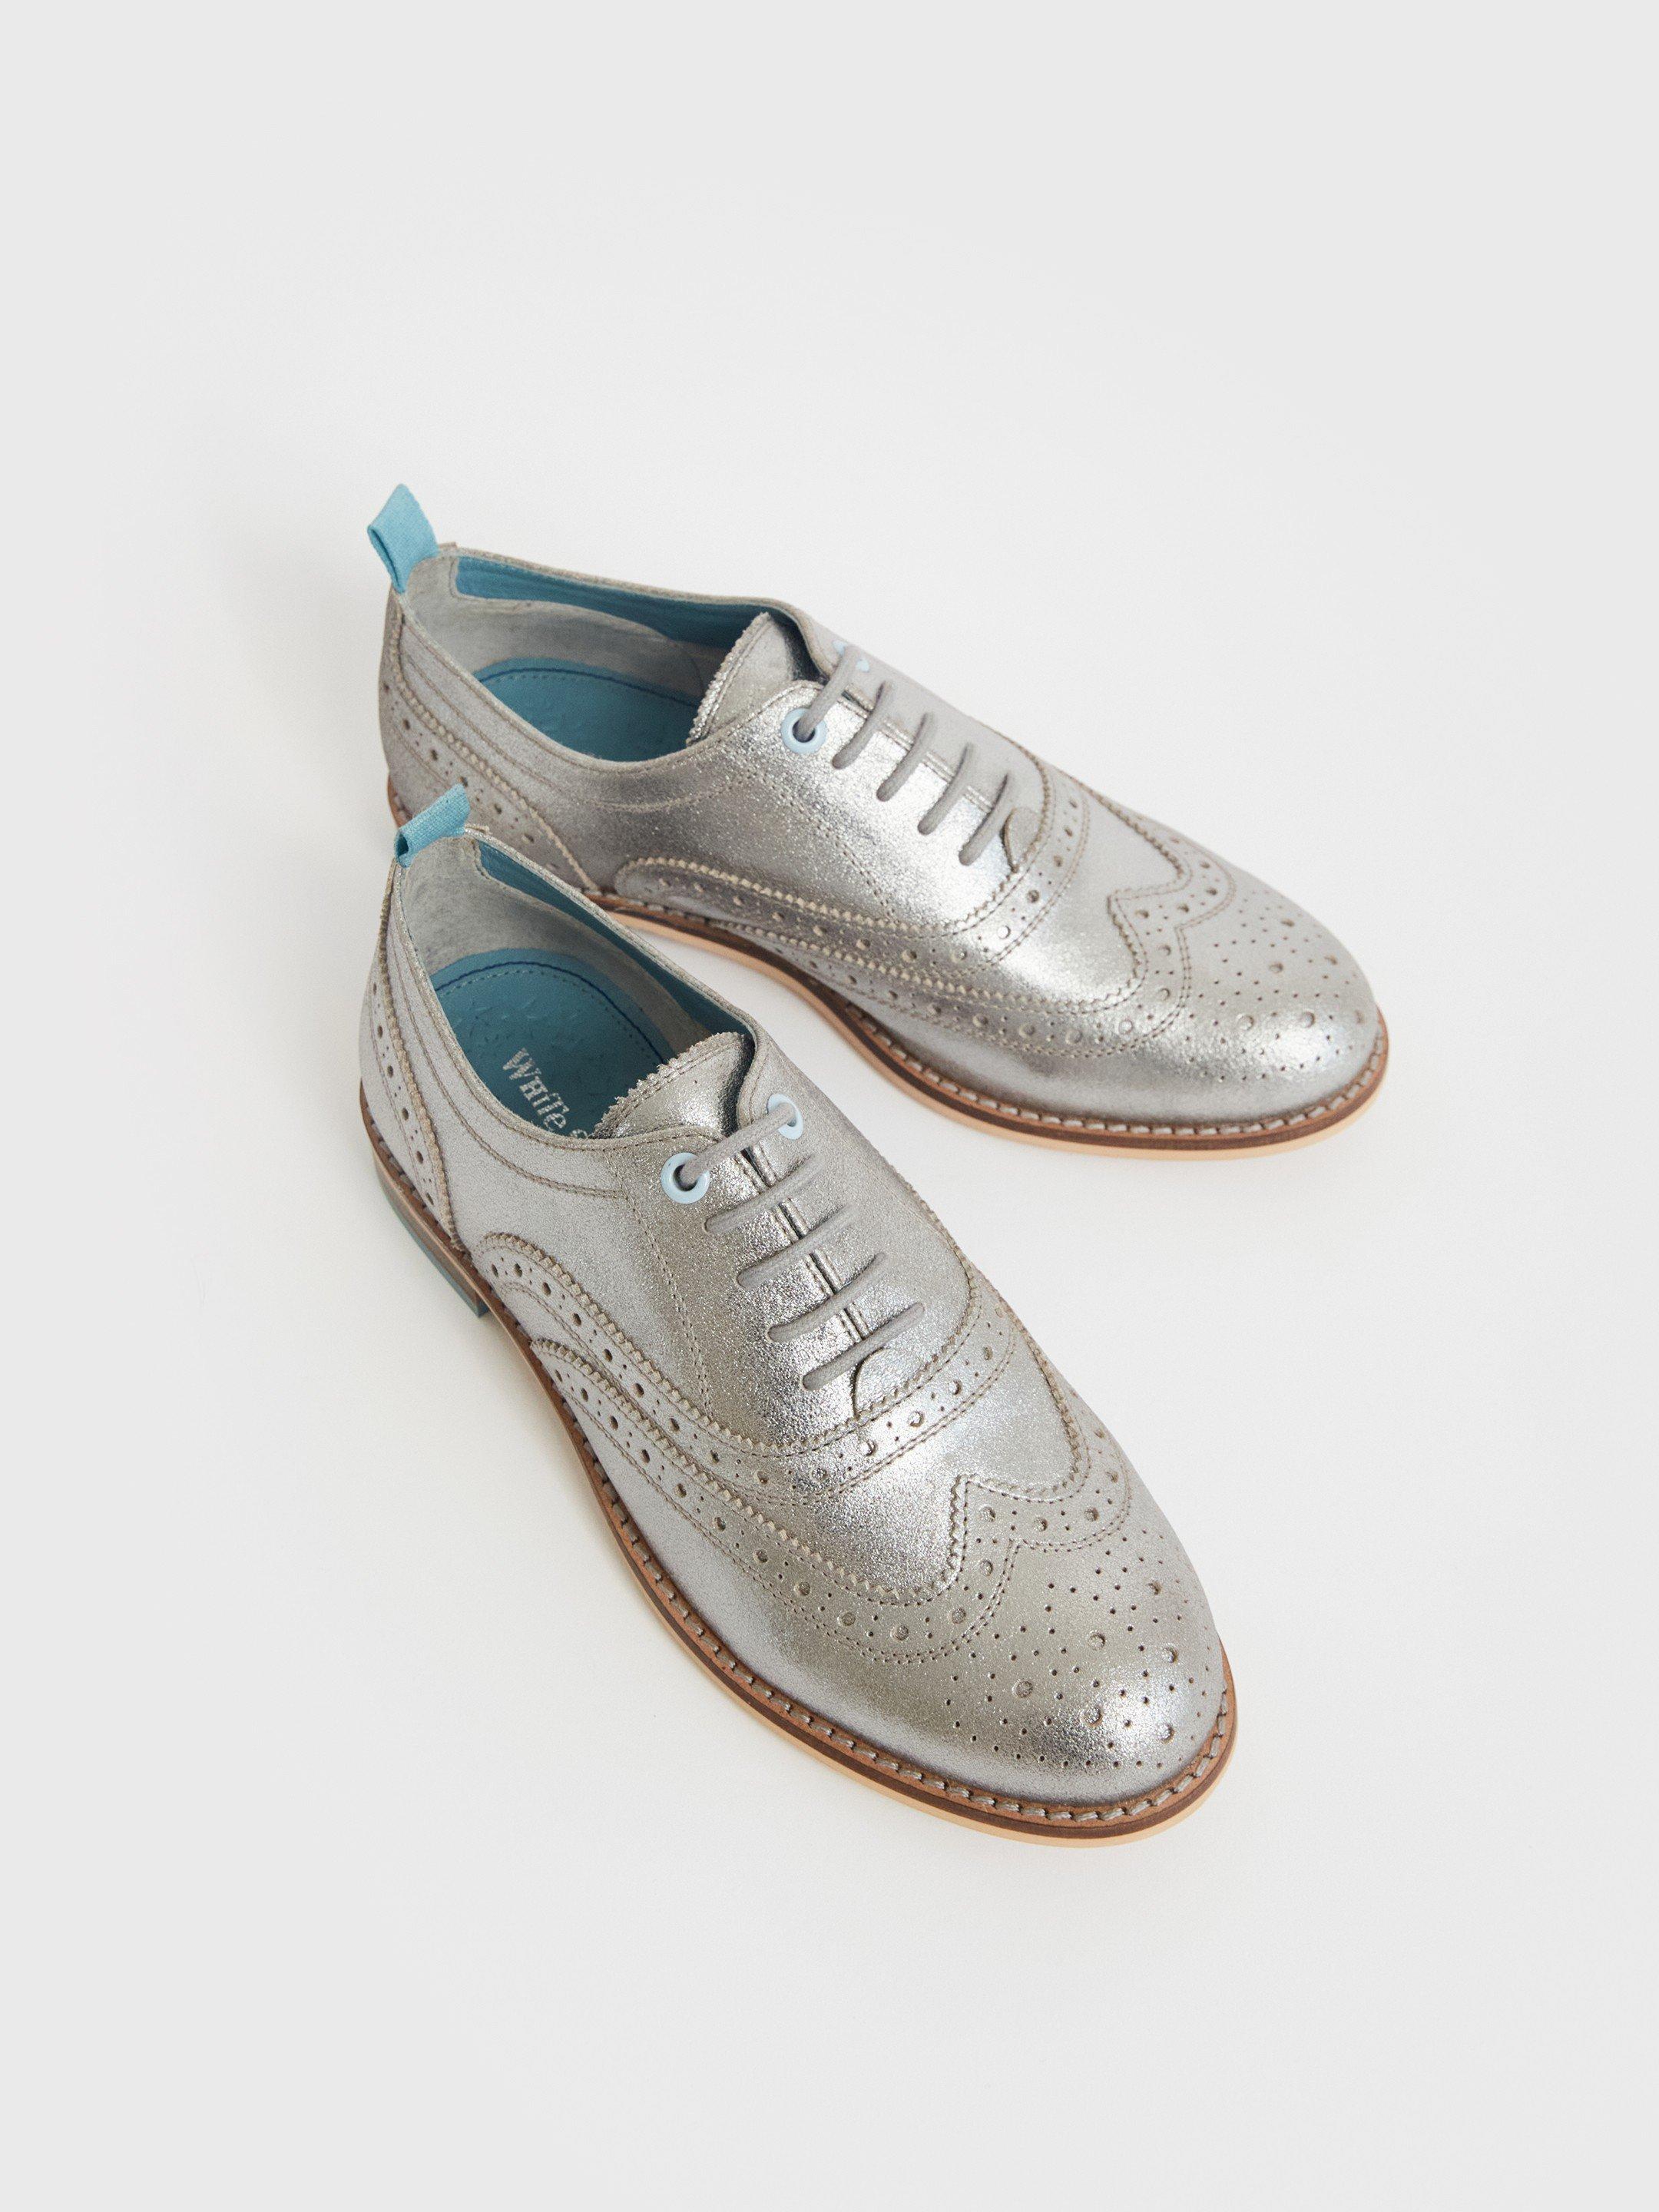 Thistle Lace Up Brogue in SLV TN MET - FLAT FRONT